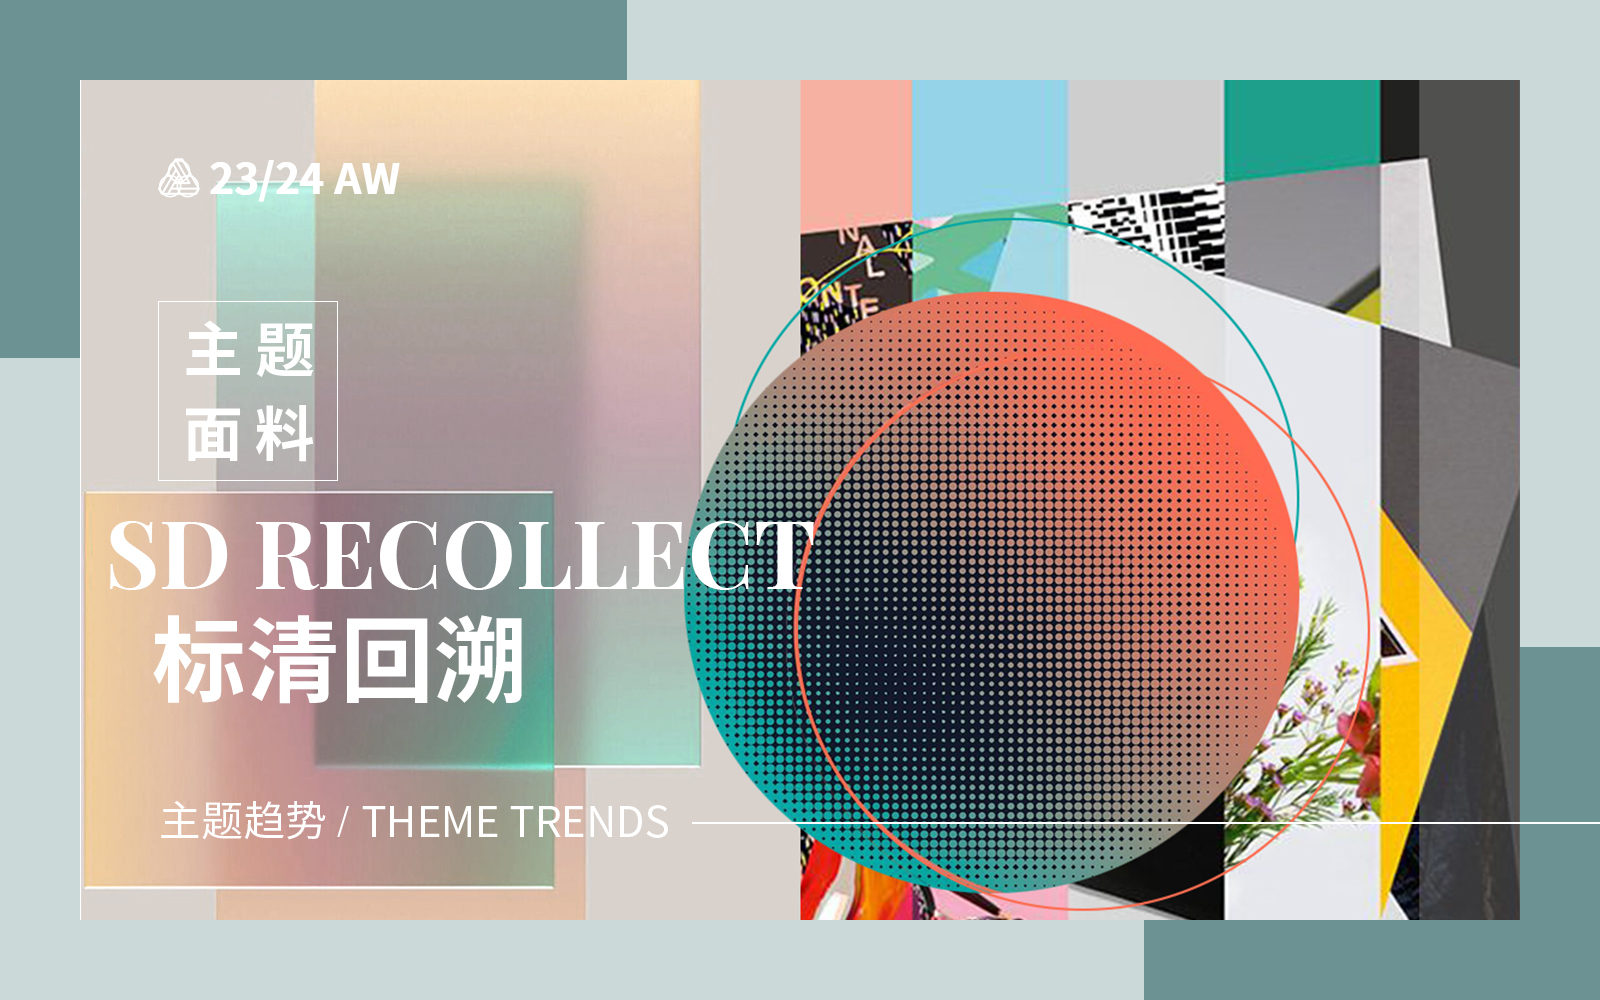 SD Recollect -- The A/W 23/24 Thematic Fabric Trend